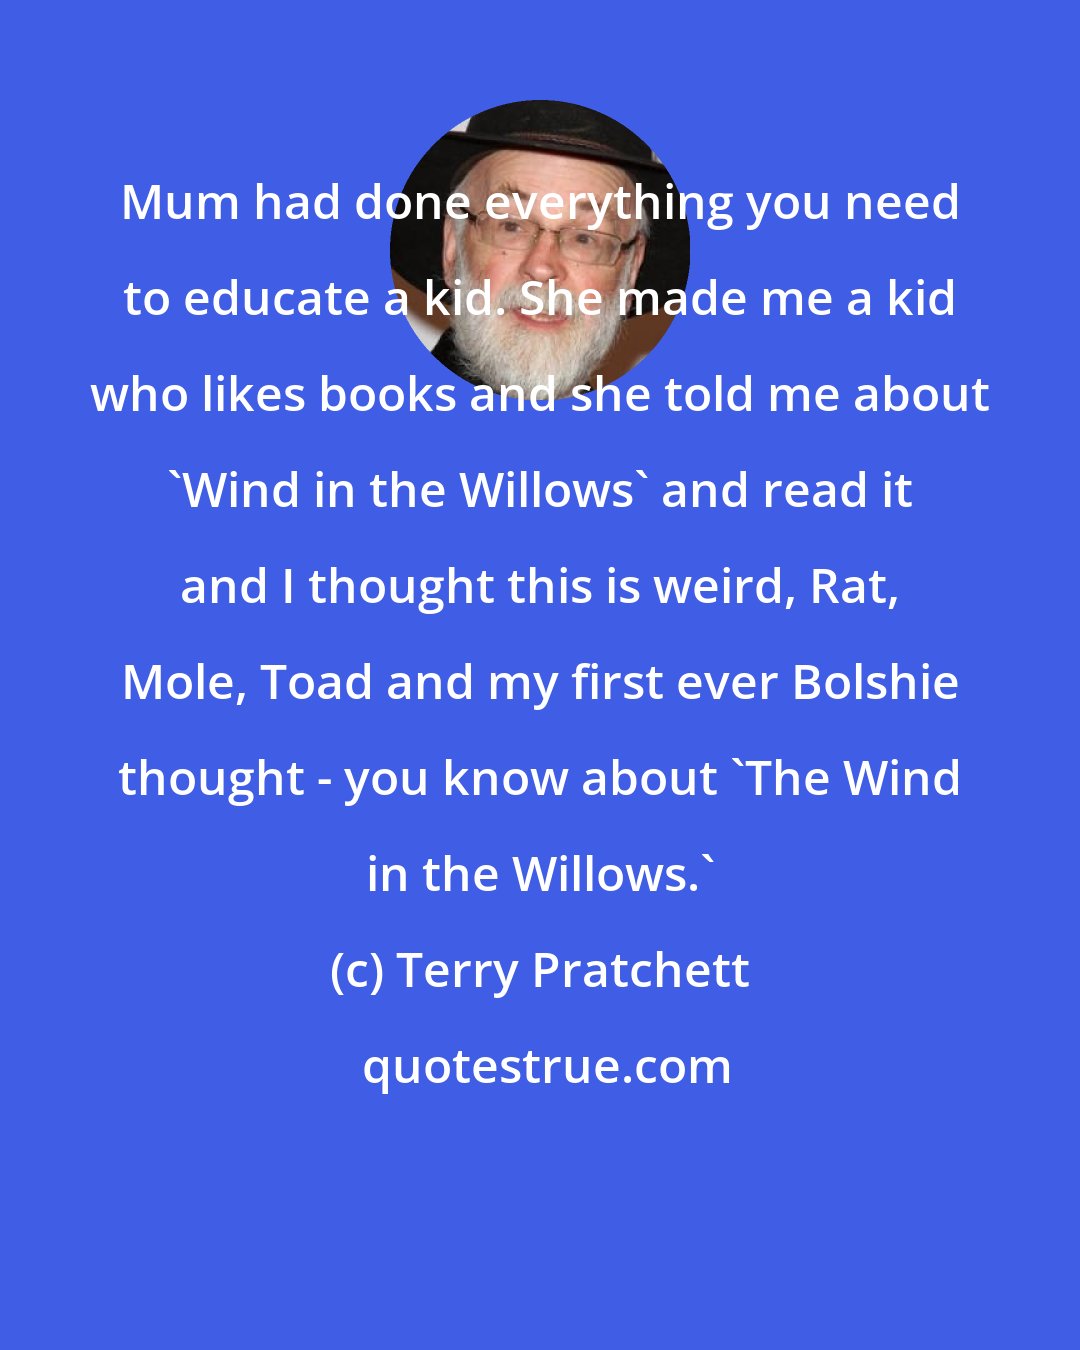 Terry Pratchett: Mum had done everything you need to educate a kid. She made me a kid who likes books and she told me about 'Wind in the Willows' and read it and I thought this is weird, Rat, Mole, Toad and my first ever Bolshie thought - you know about 'The Wind in the Willows.'